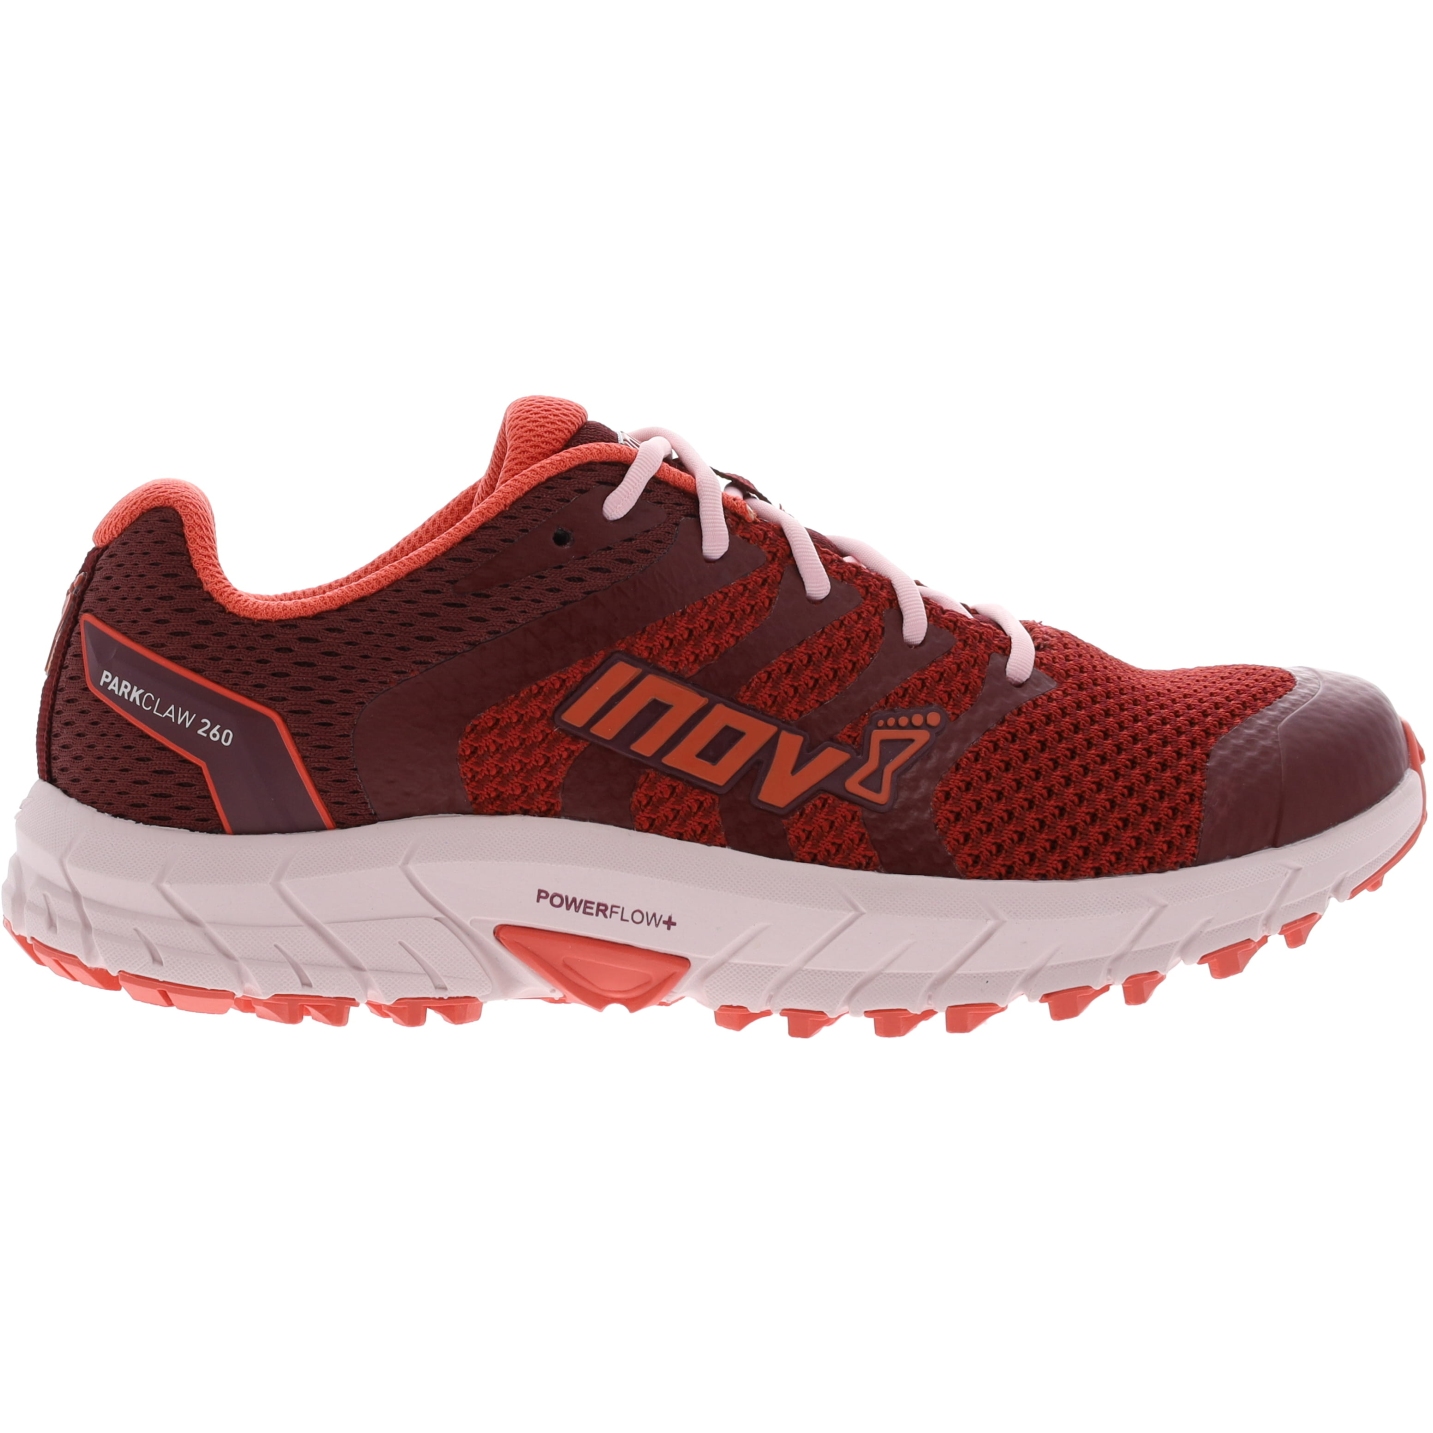 Image of Inov-8 Parkclaw 260 Knit Wide Women's Running Shoes - red/burgundy